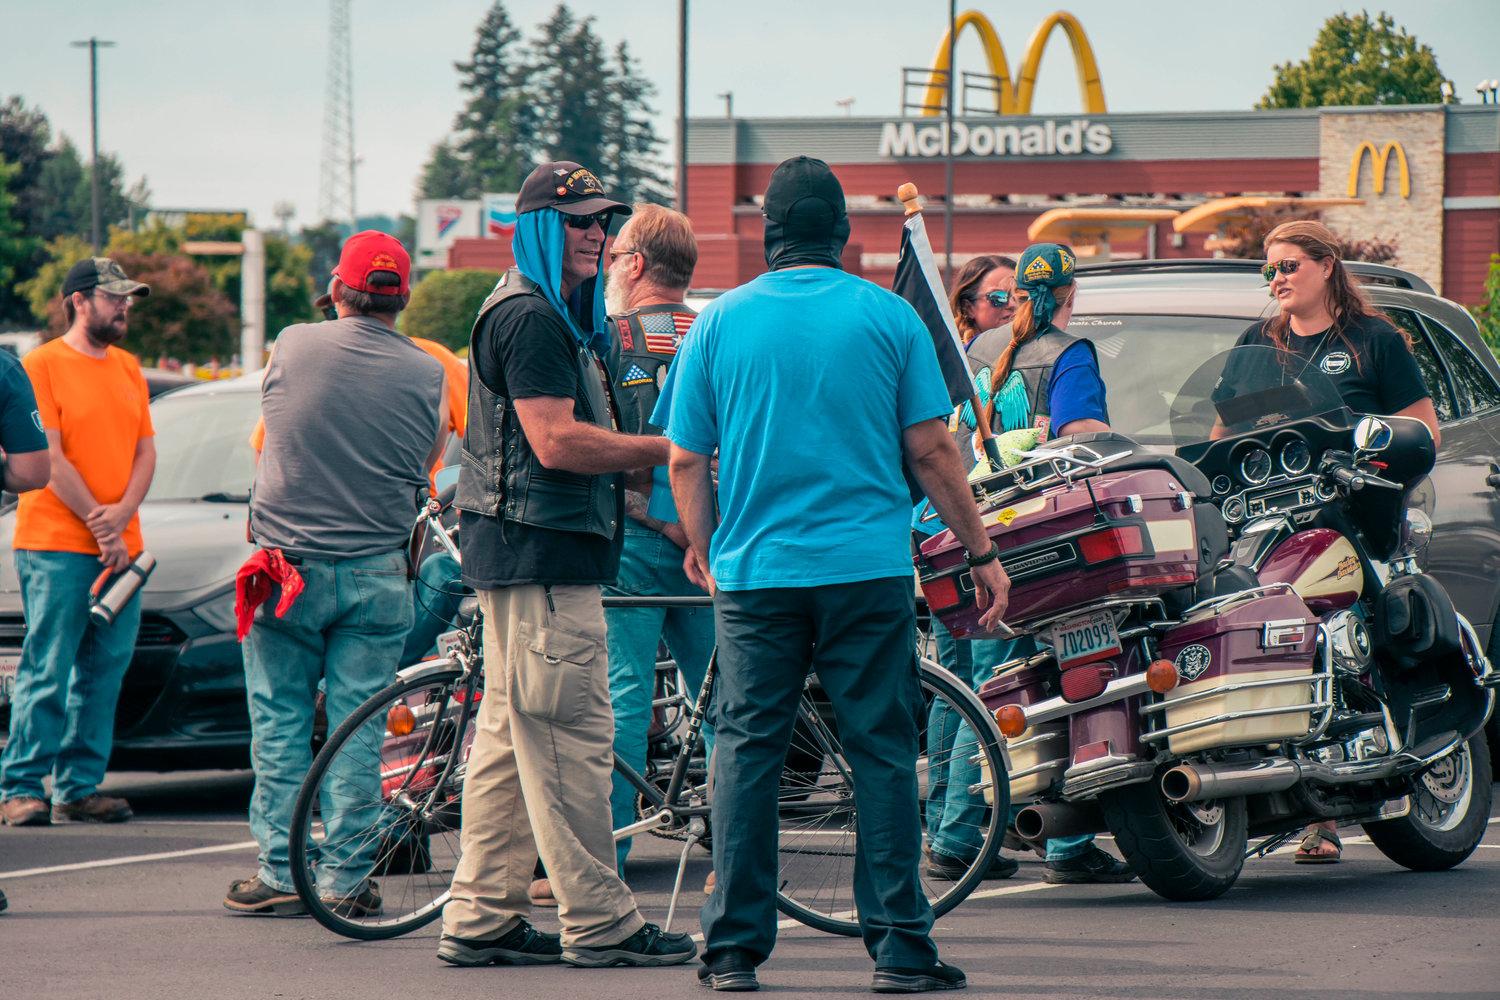 Hamilton sign supporters mingle in the parking lot of Bethel Church Tuesday afternoon in south Chehalis.